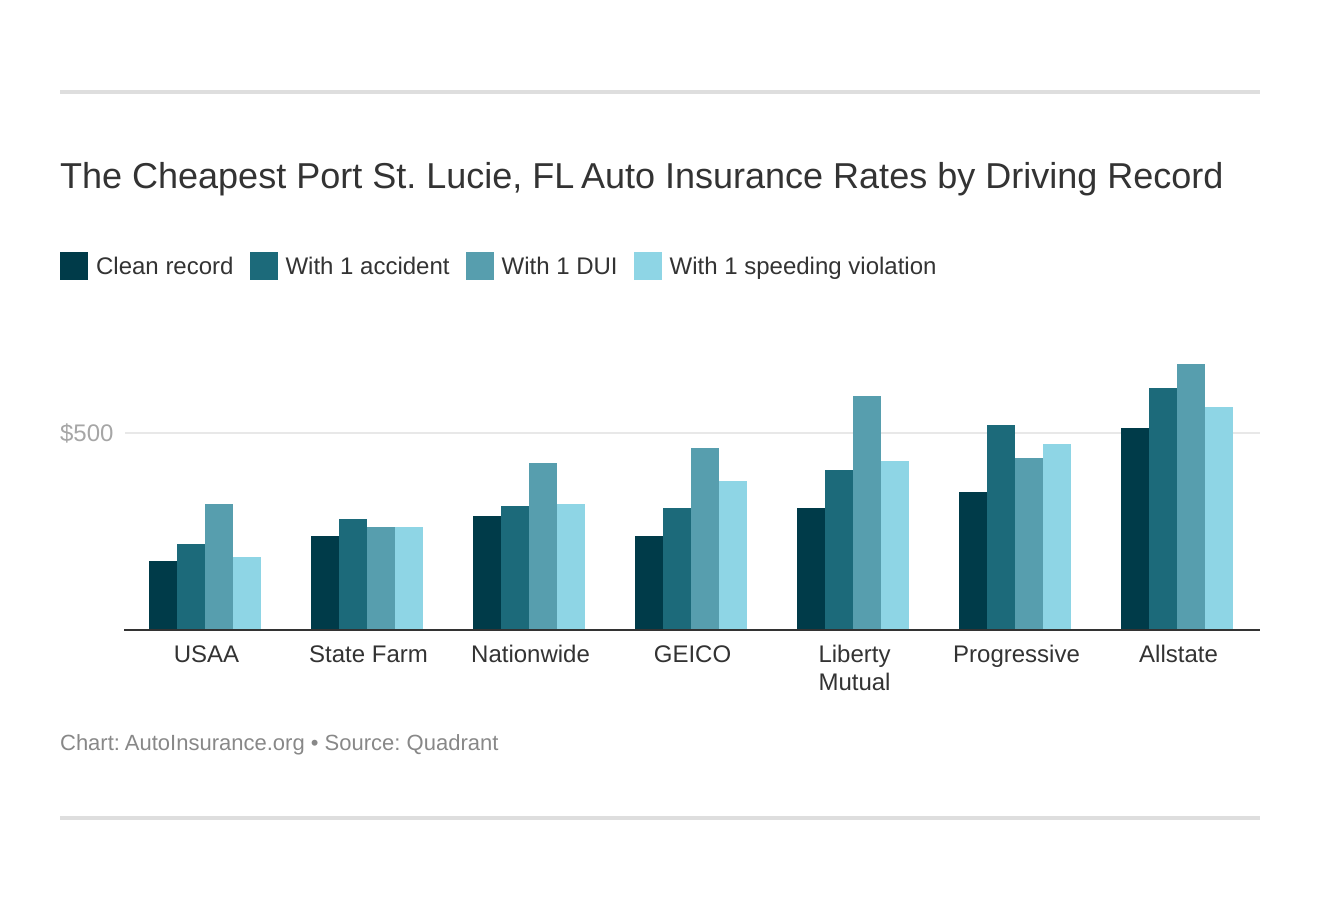 The Cheapest Port St. Lucie, FL Auto Insurance Rates by Driving Record